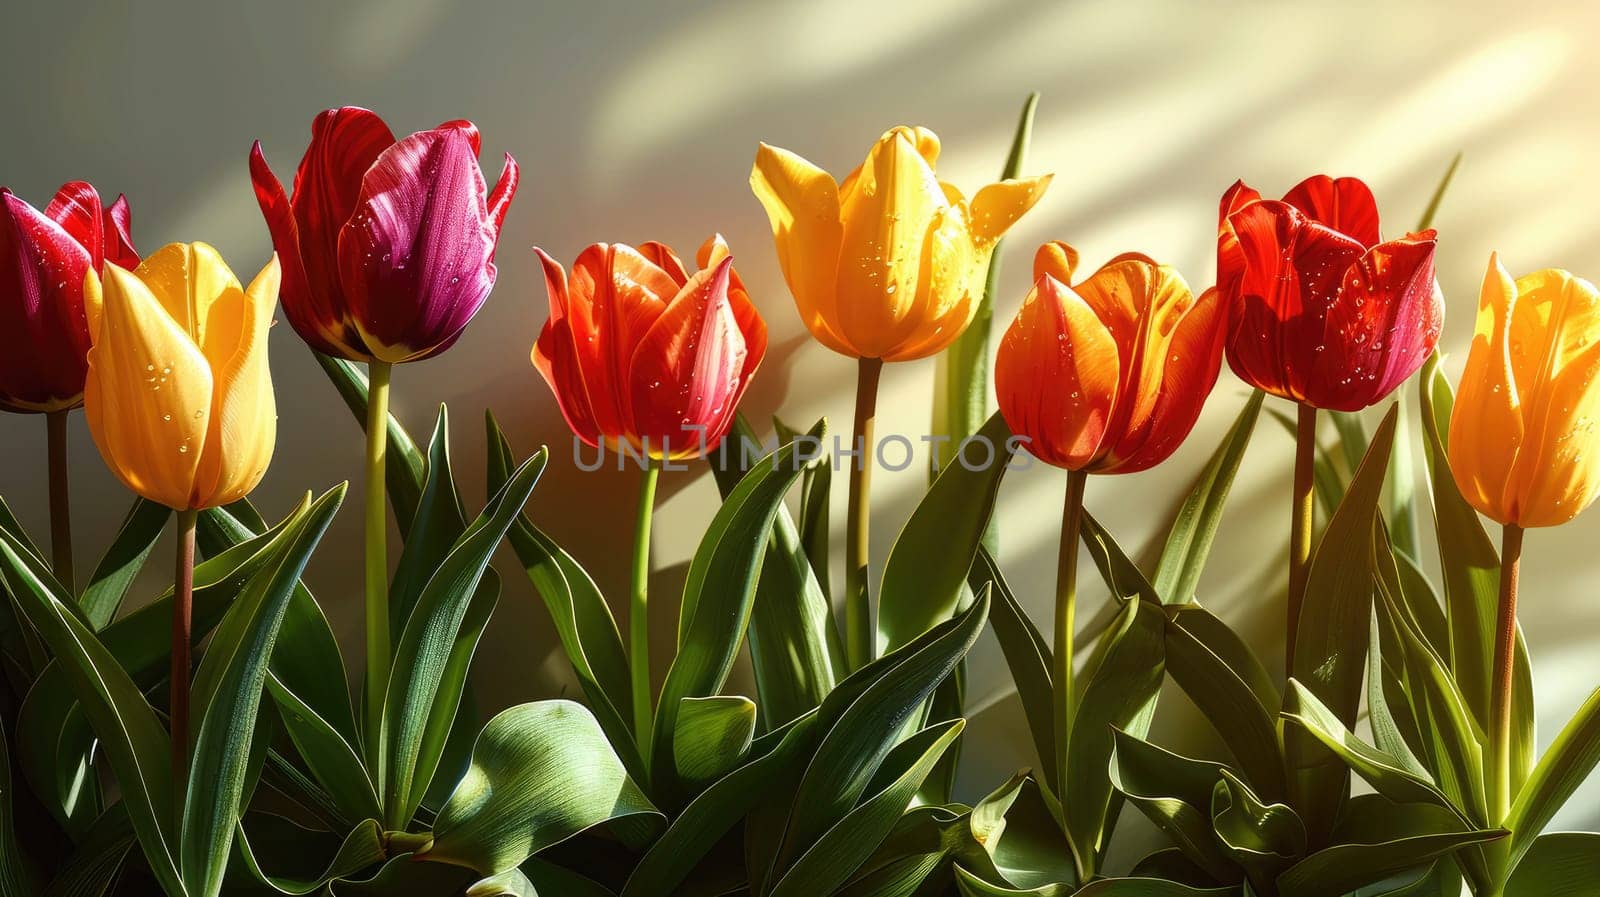 Bright multi-colored tulips on a light background create an atmosphere of spring tenderness and inspire with the rainbow colors of nature.